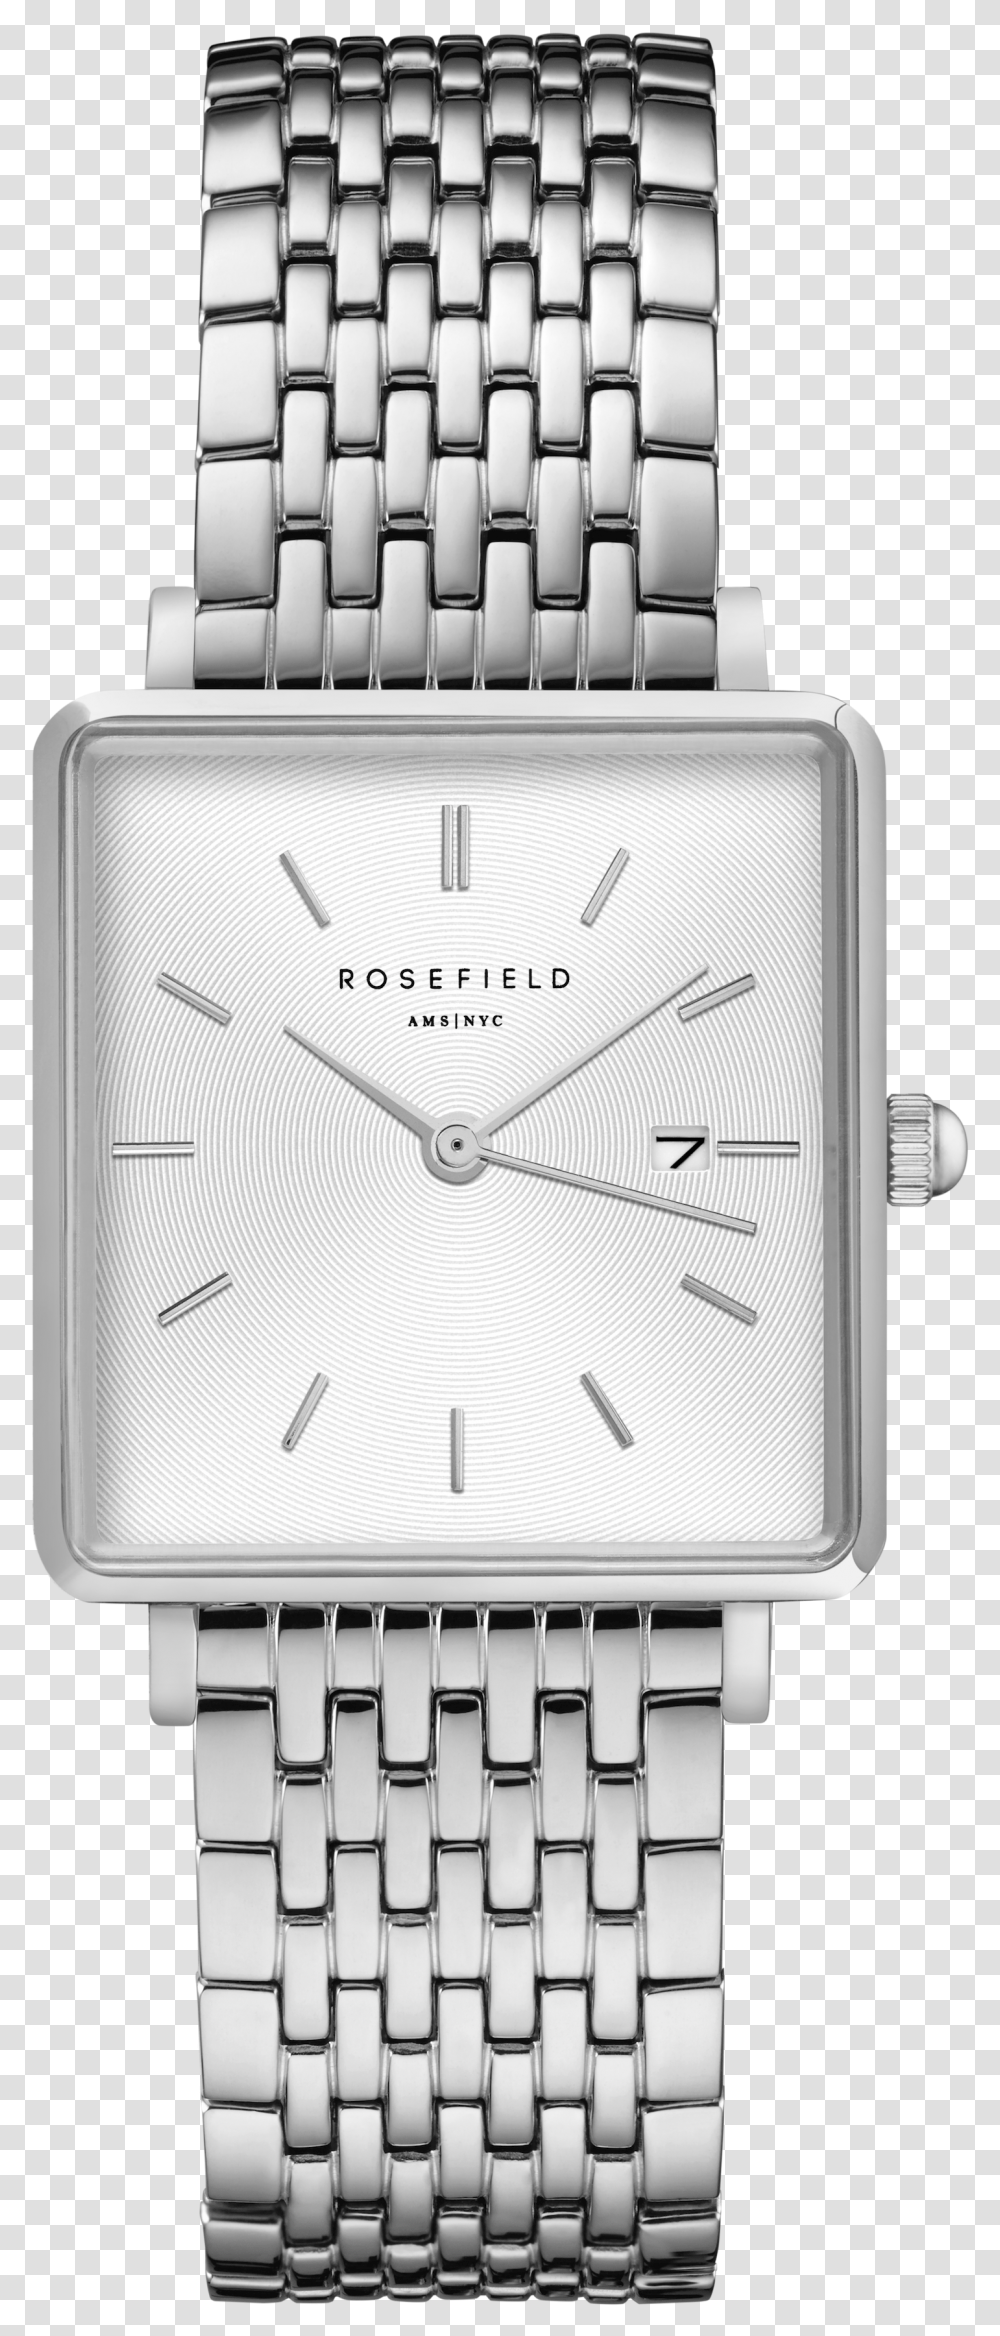 The Boxy White Sunray Steel Silver Rosefield Qwsr, Analog Clock, Alarm Clock, Clock Tower, Architecture Transparent Png